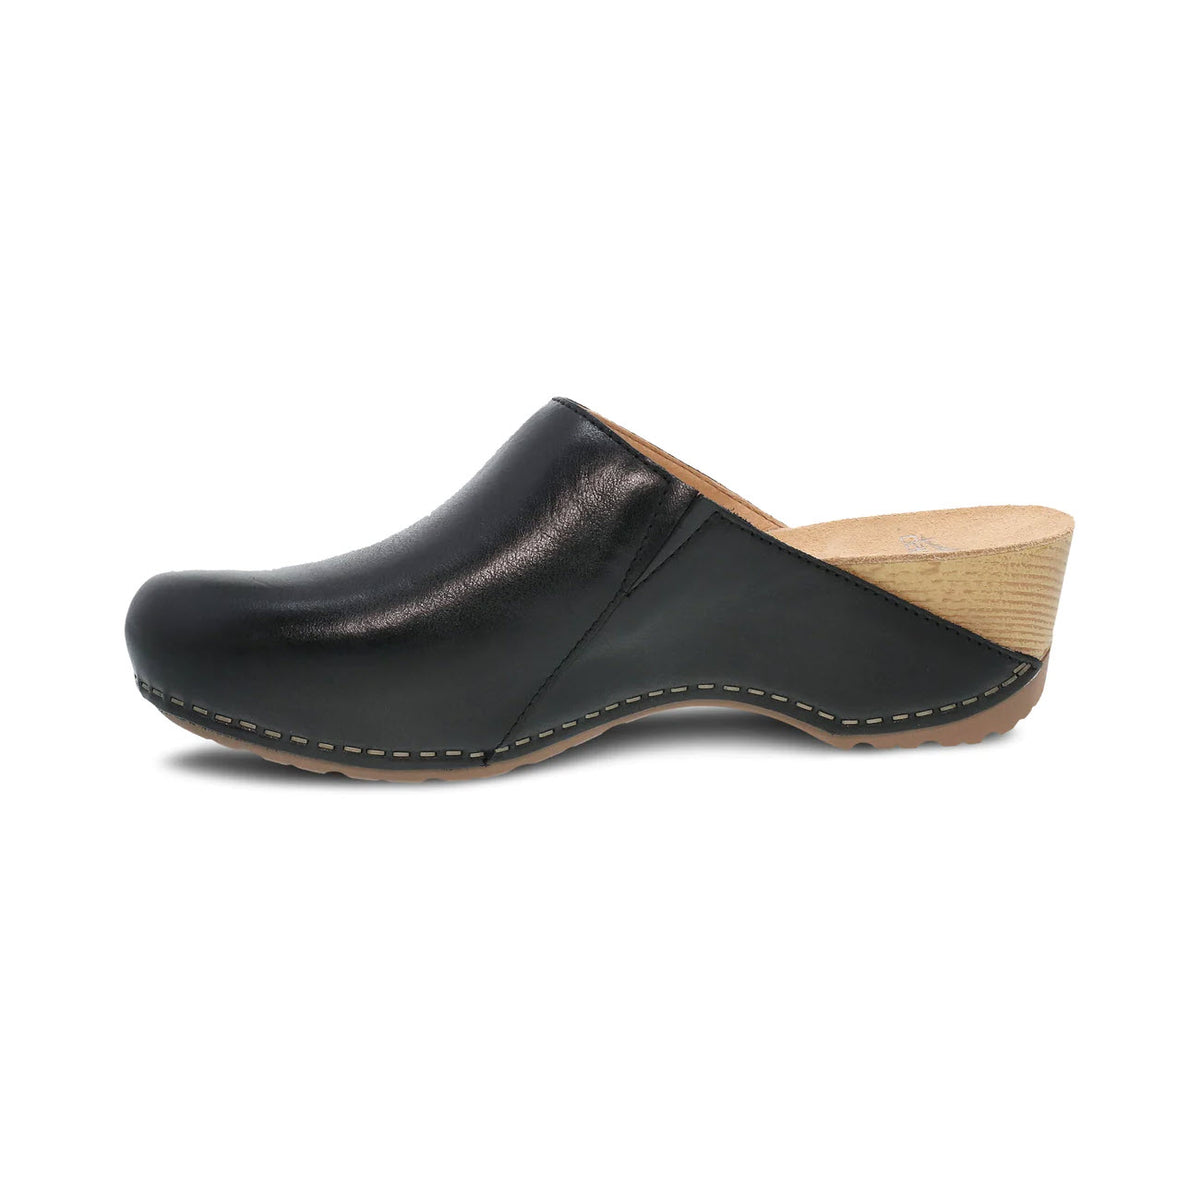 Dansko Talulah Black clog with milled nubuck uppers and a wooden sole, isolated on a white background.